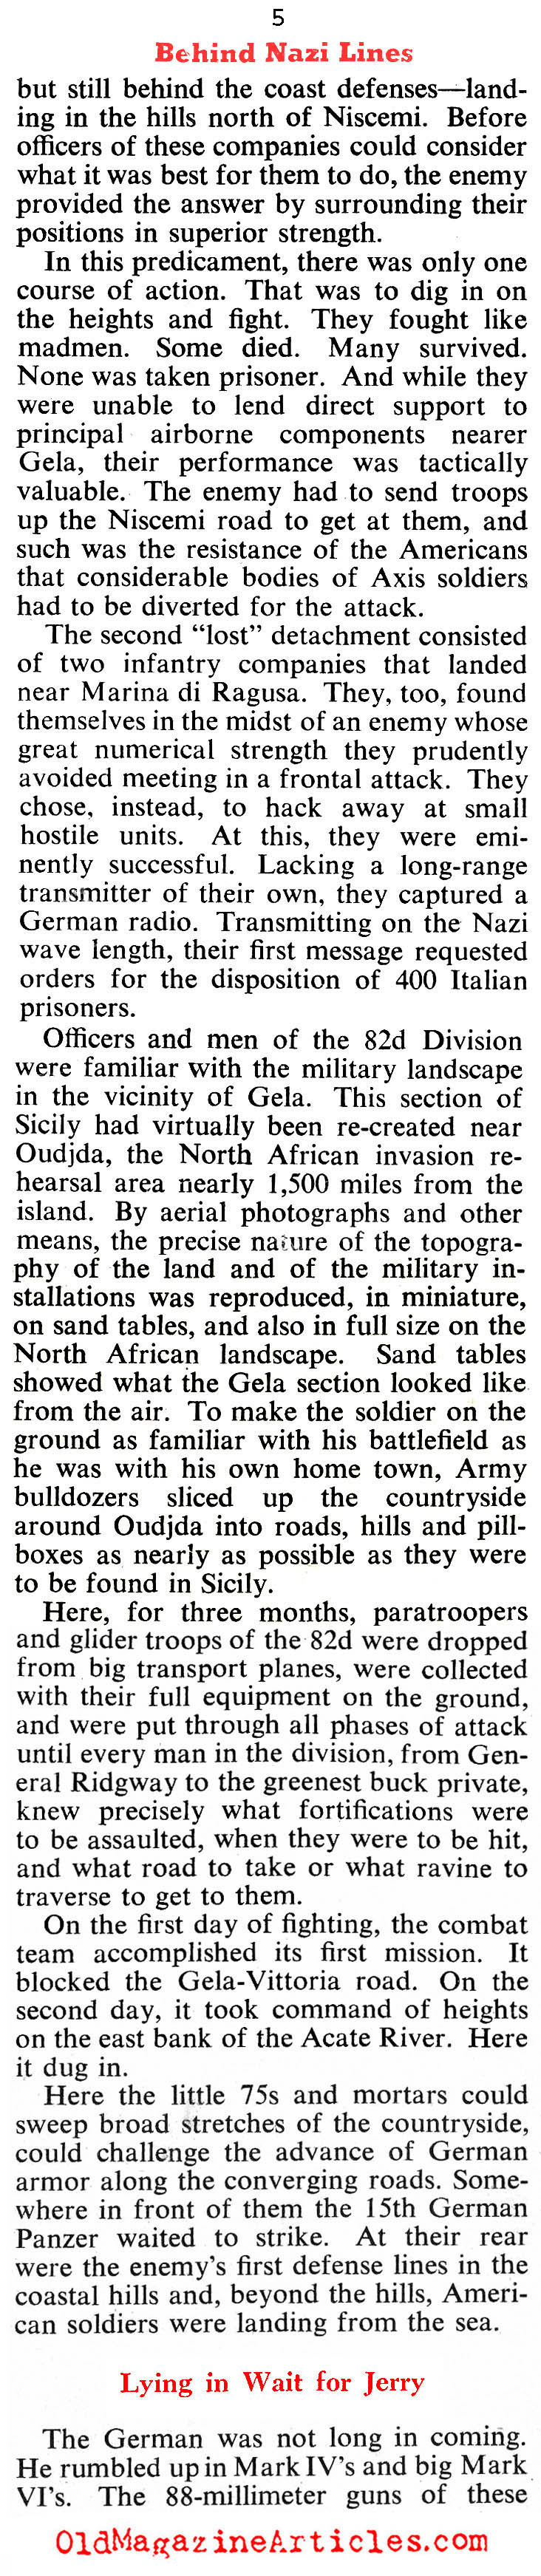 The 82nd Airborne in Sicily (Collier's Magazine, 1943)